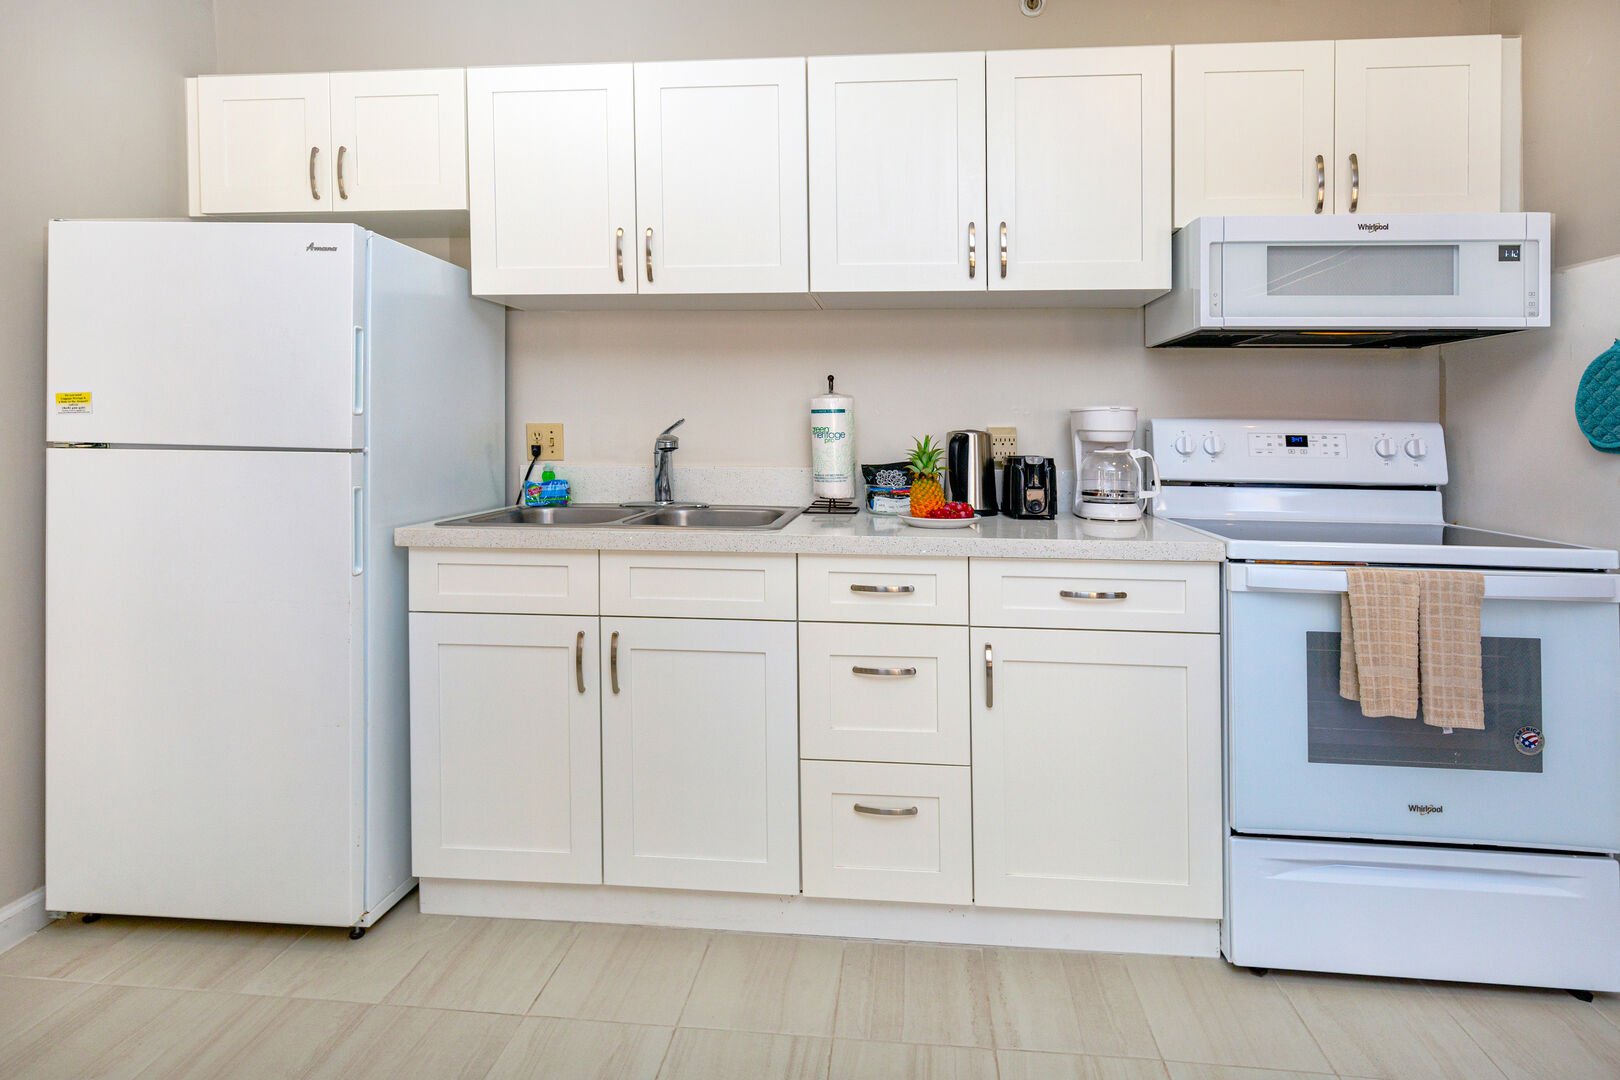 The fully equipped kitchen is designed for your culinary needs!